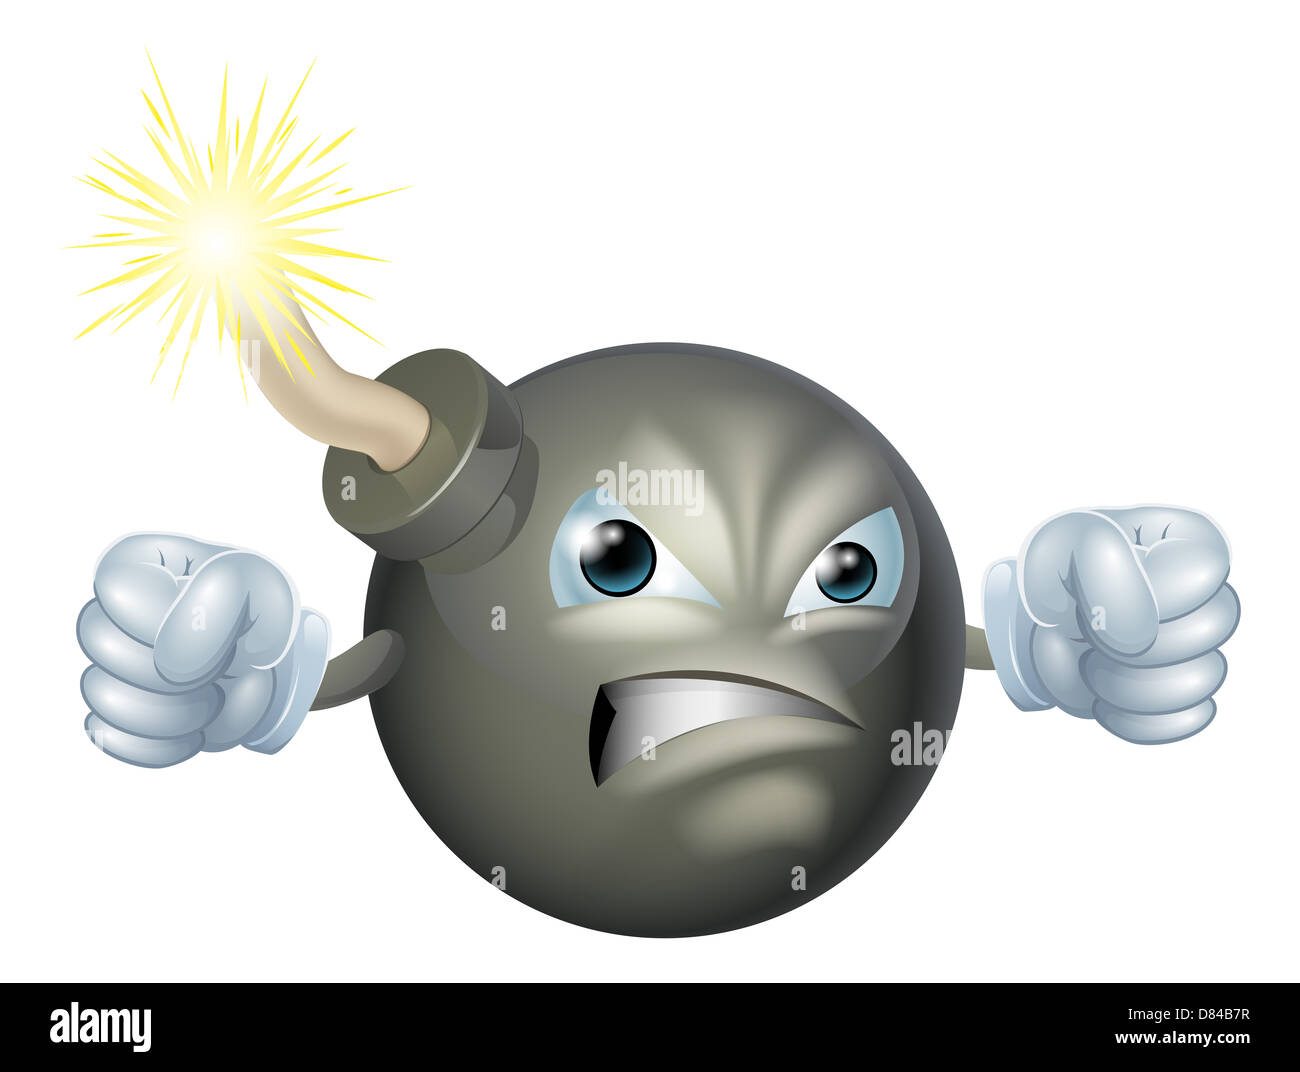 An illustration of an angry looking cartoon bomb character Stock Photo